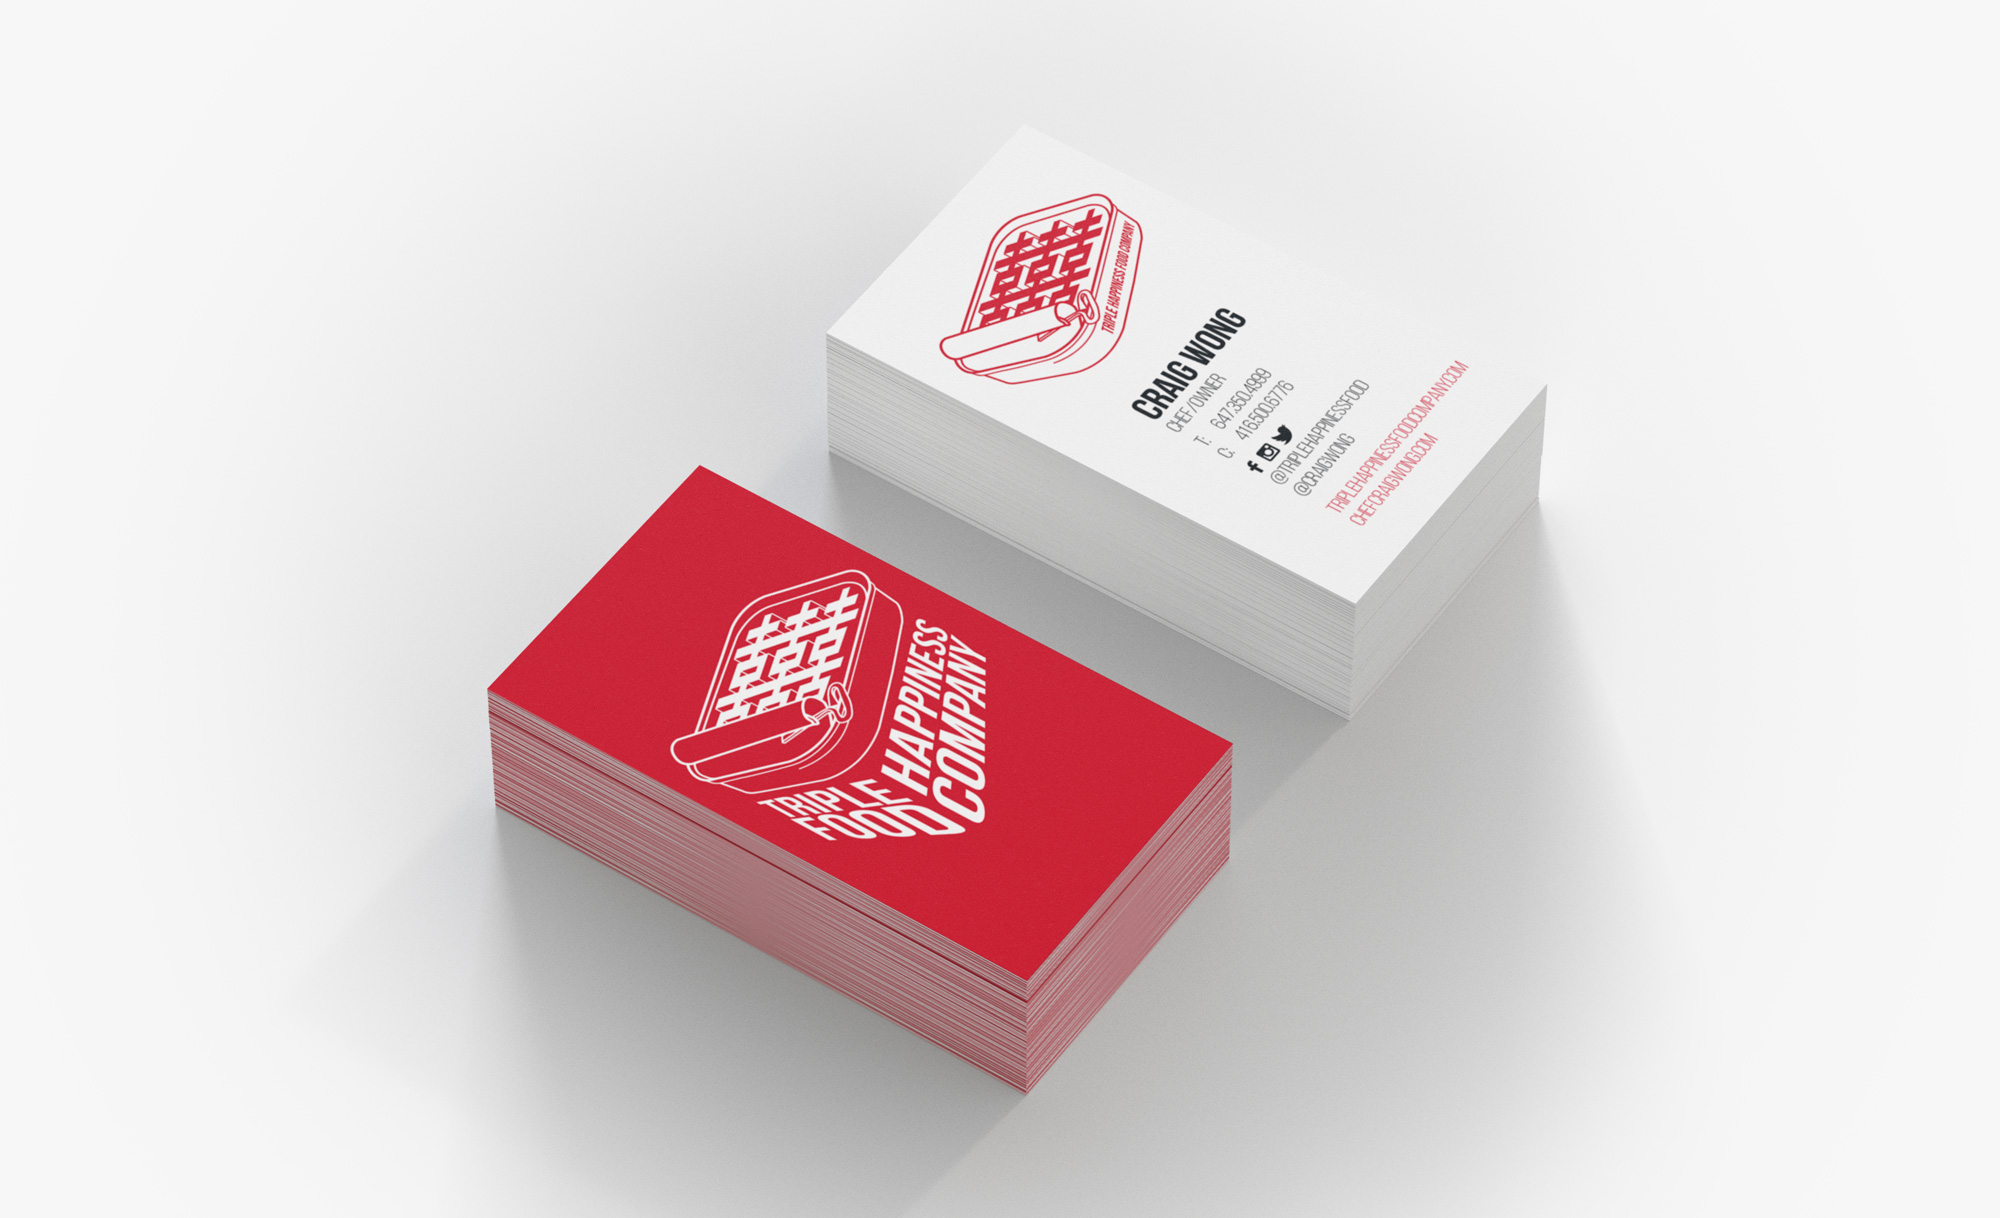 Triple Happiness Food Company business card designed by Elsie Lam